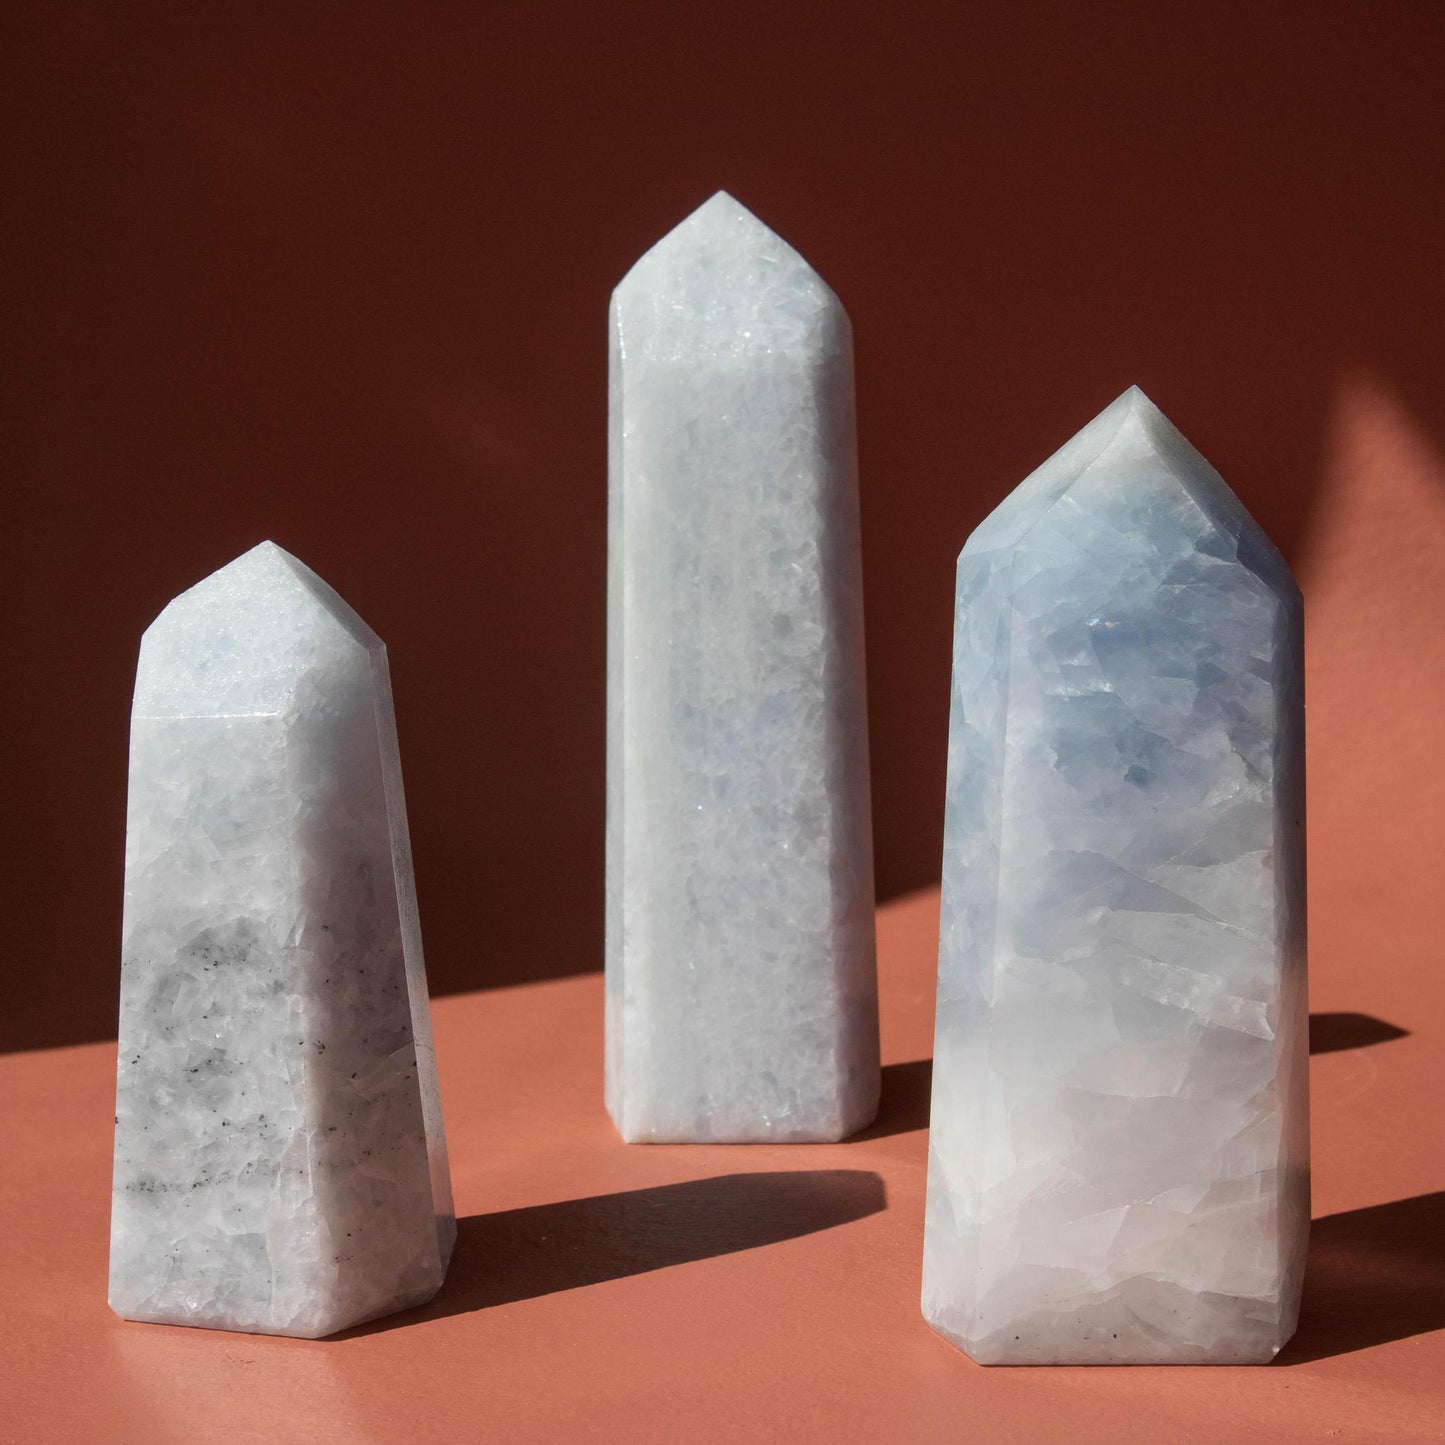 blue calcite, blue calcite tower, crystal tower, blue calcite crystal, blue calcite stone, blue calcite properties, blue calcite healing properties, blue calcite metaphysical properties, blue calcite meaning